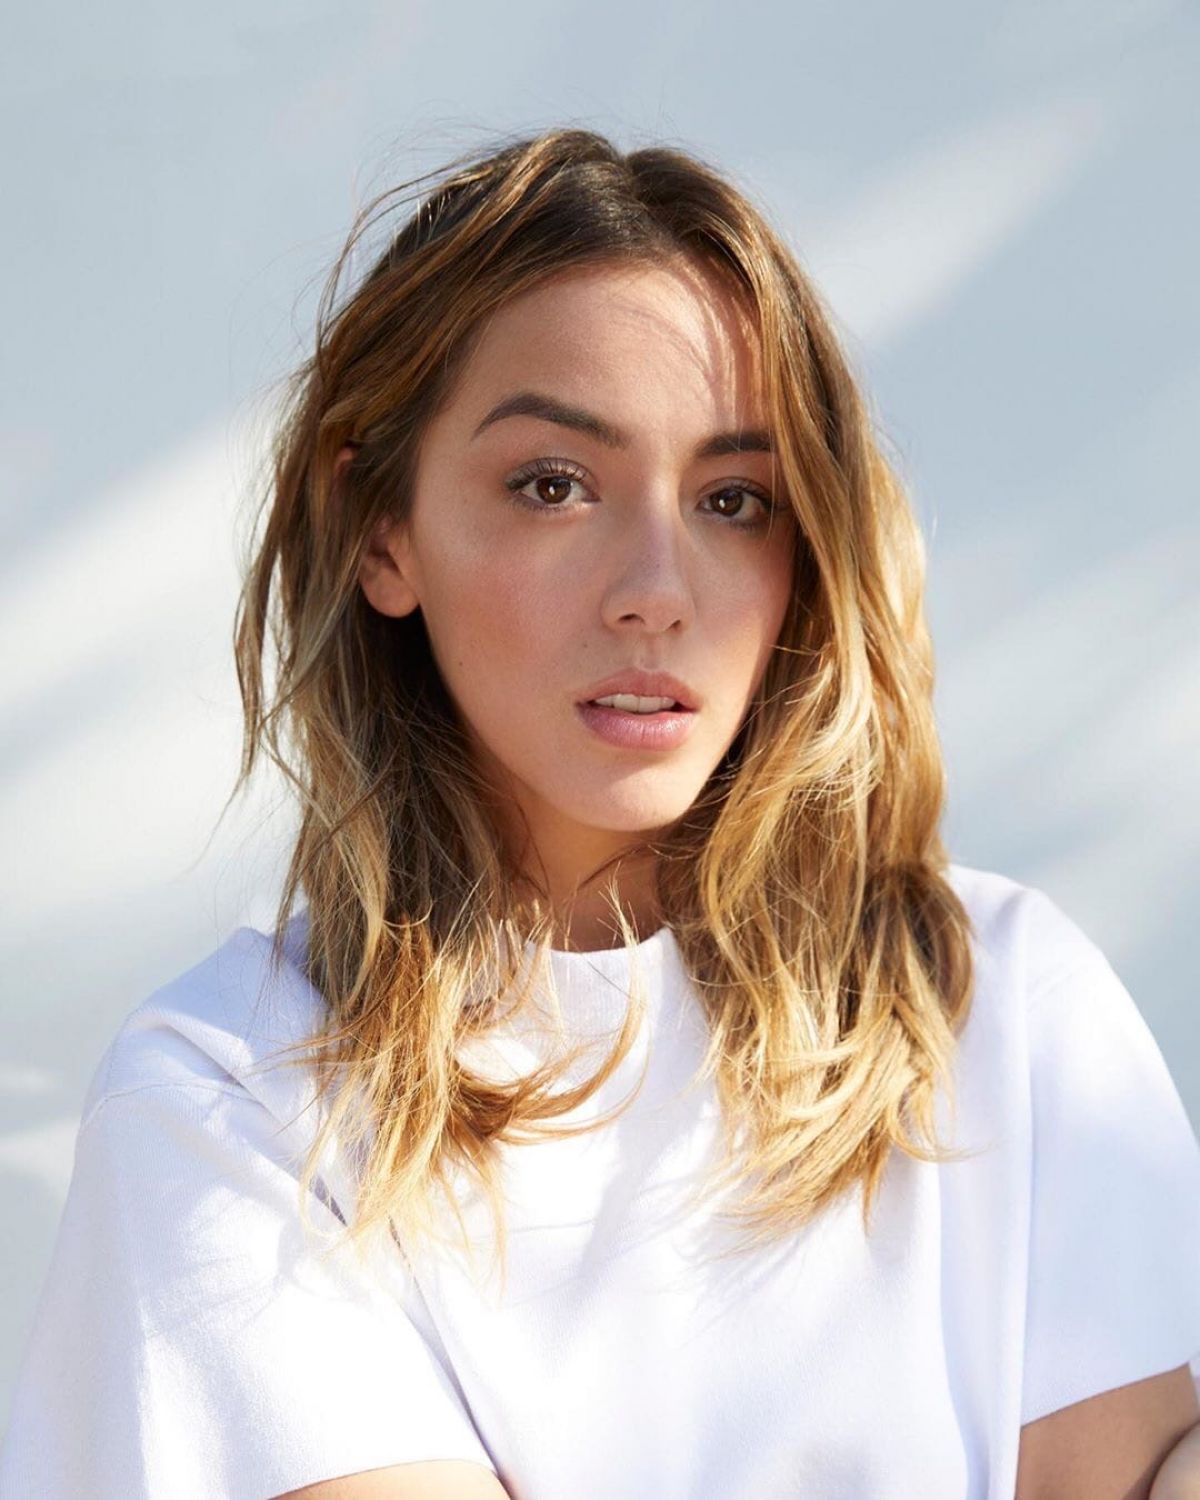 Chloe Bennet Nude Pictures is sick